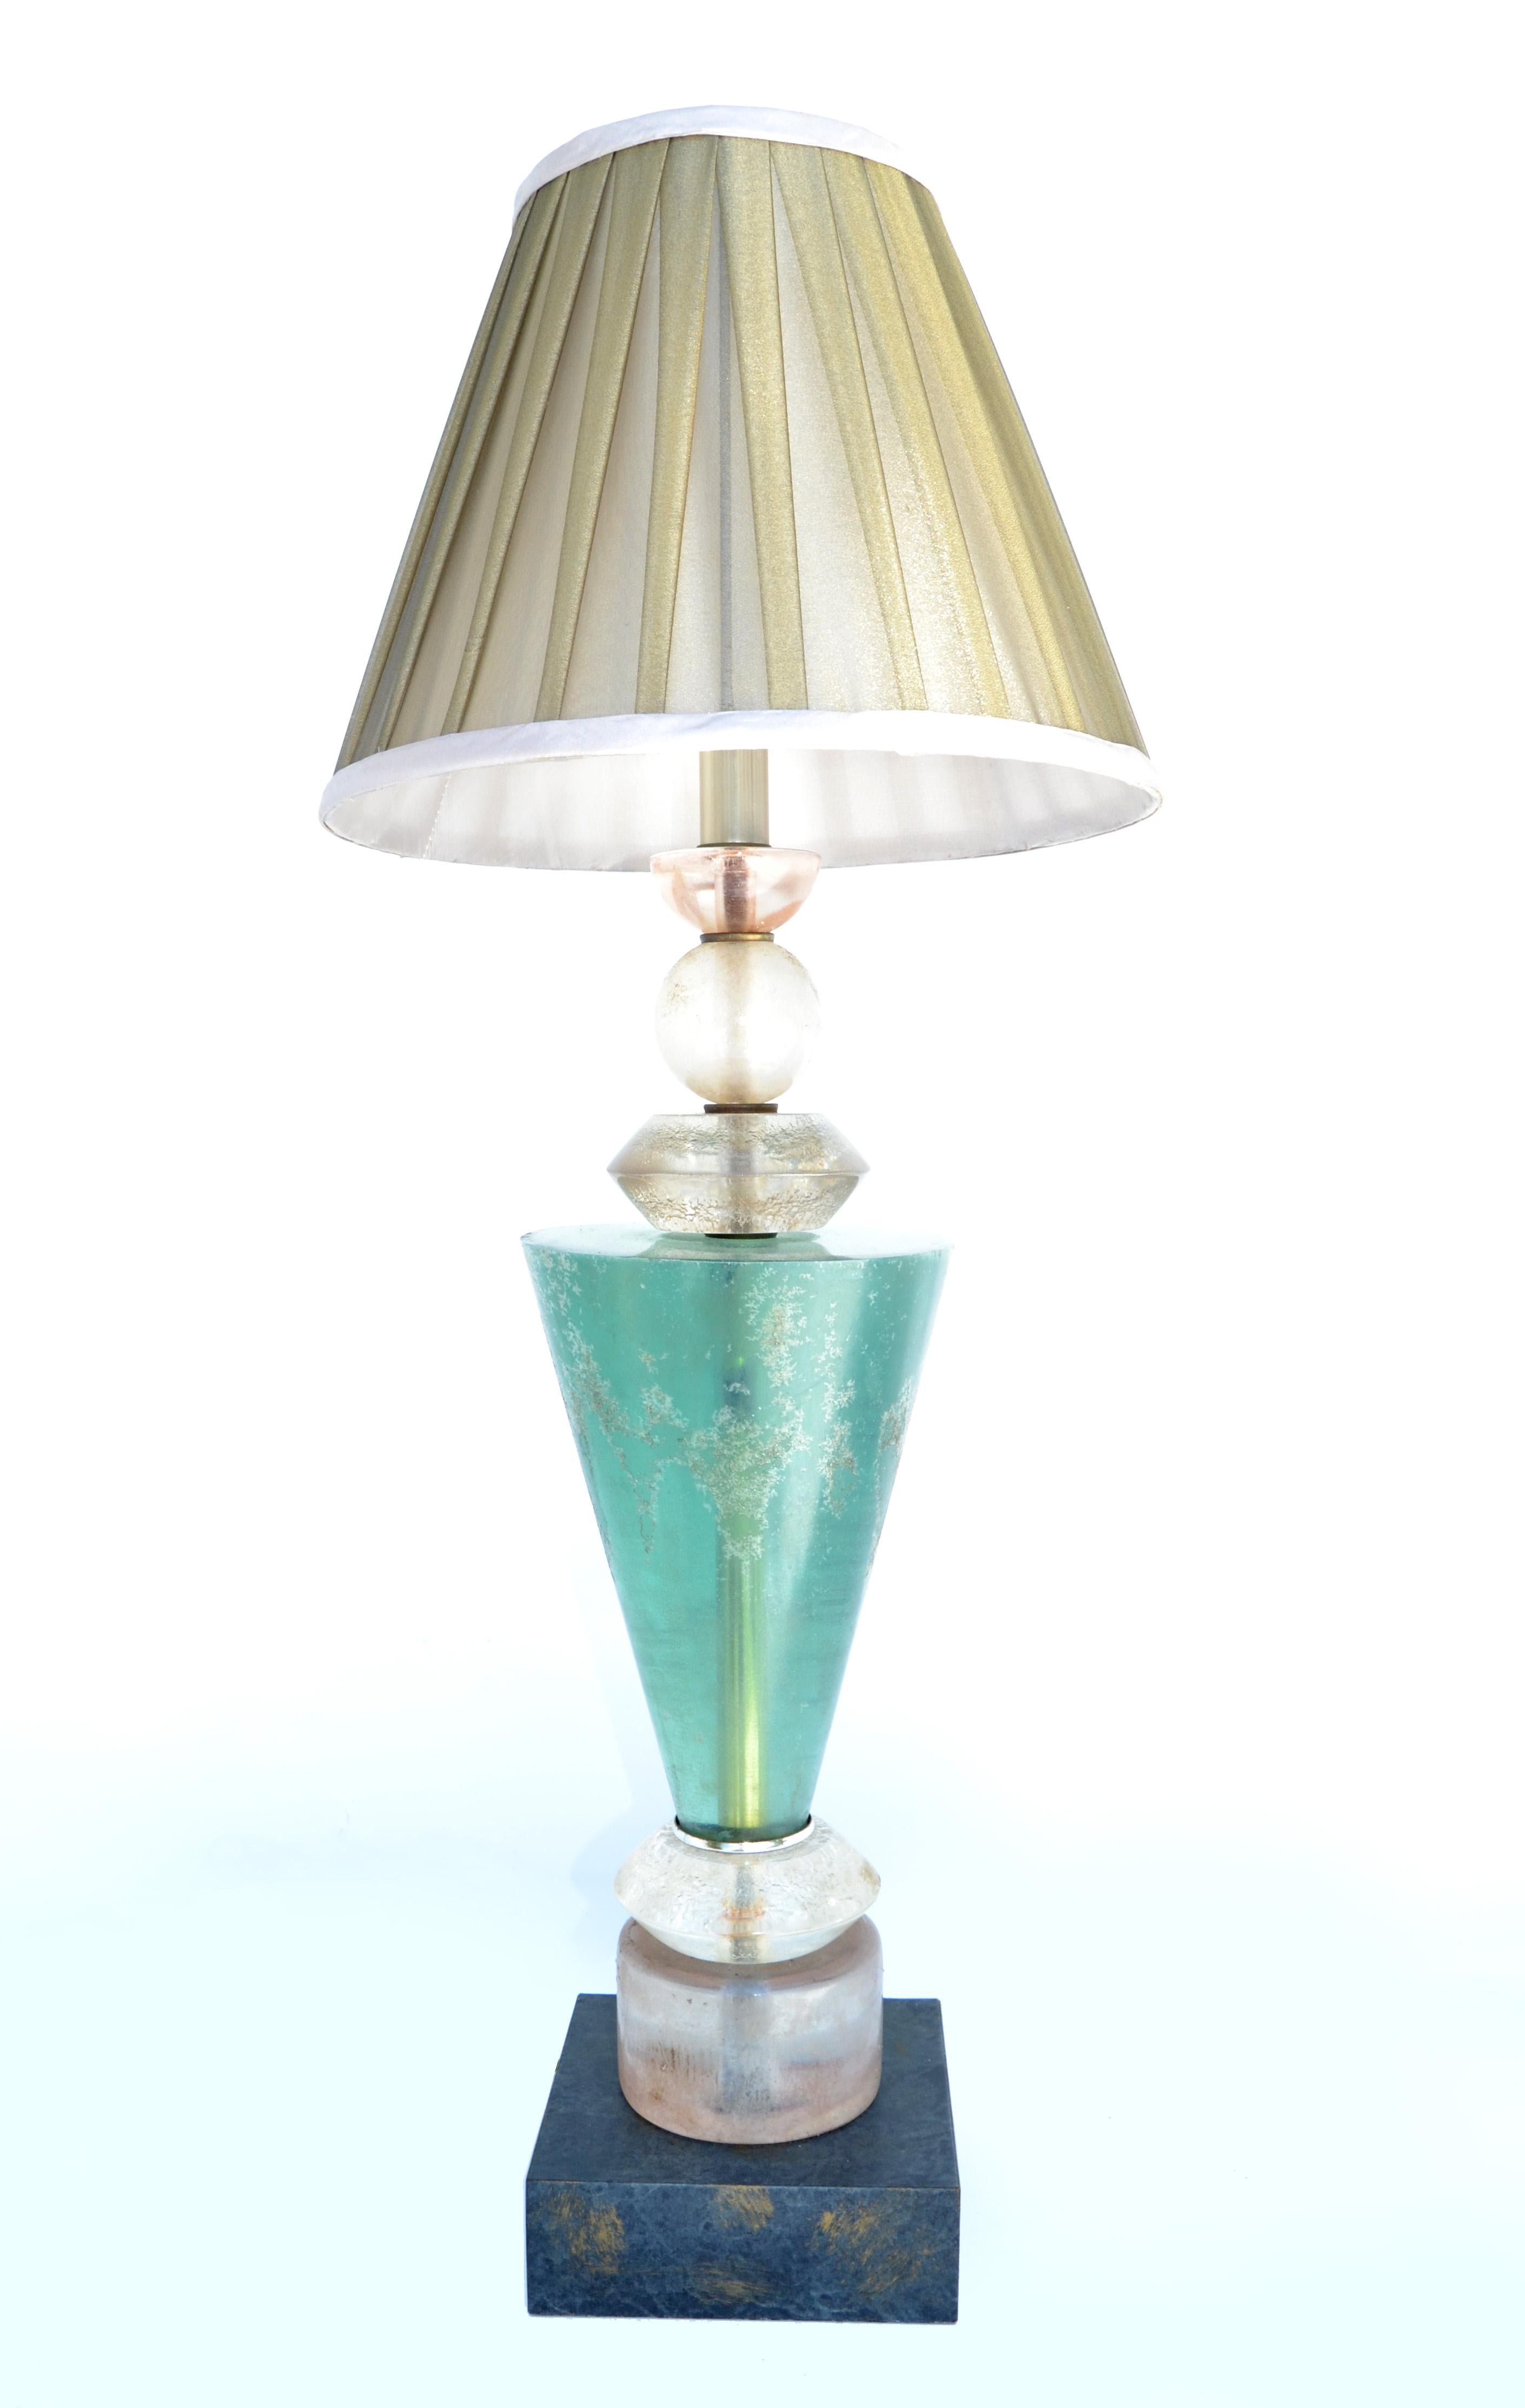 White, green, black, gold Lucite Hivo Van teal table lamp with gold pleated fabric shade.
US wired, UL Listing and in working condition.
The black laminated base measures 6 x 6 inches.
Have a look on our large collection of Van Teal table